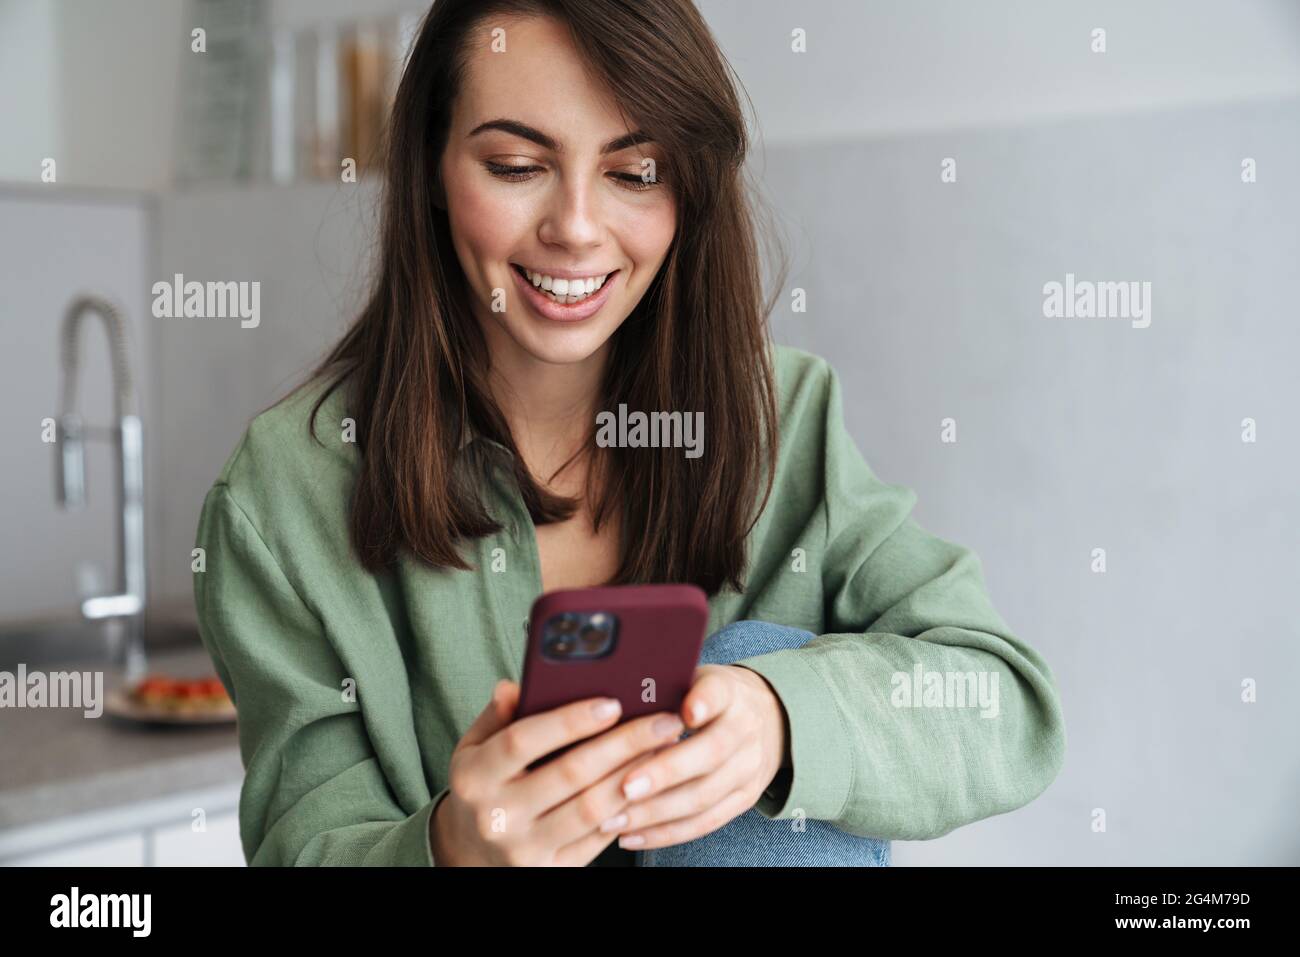 Young smiling woman using mobile phone while sitting at home kitchen Stock Photo